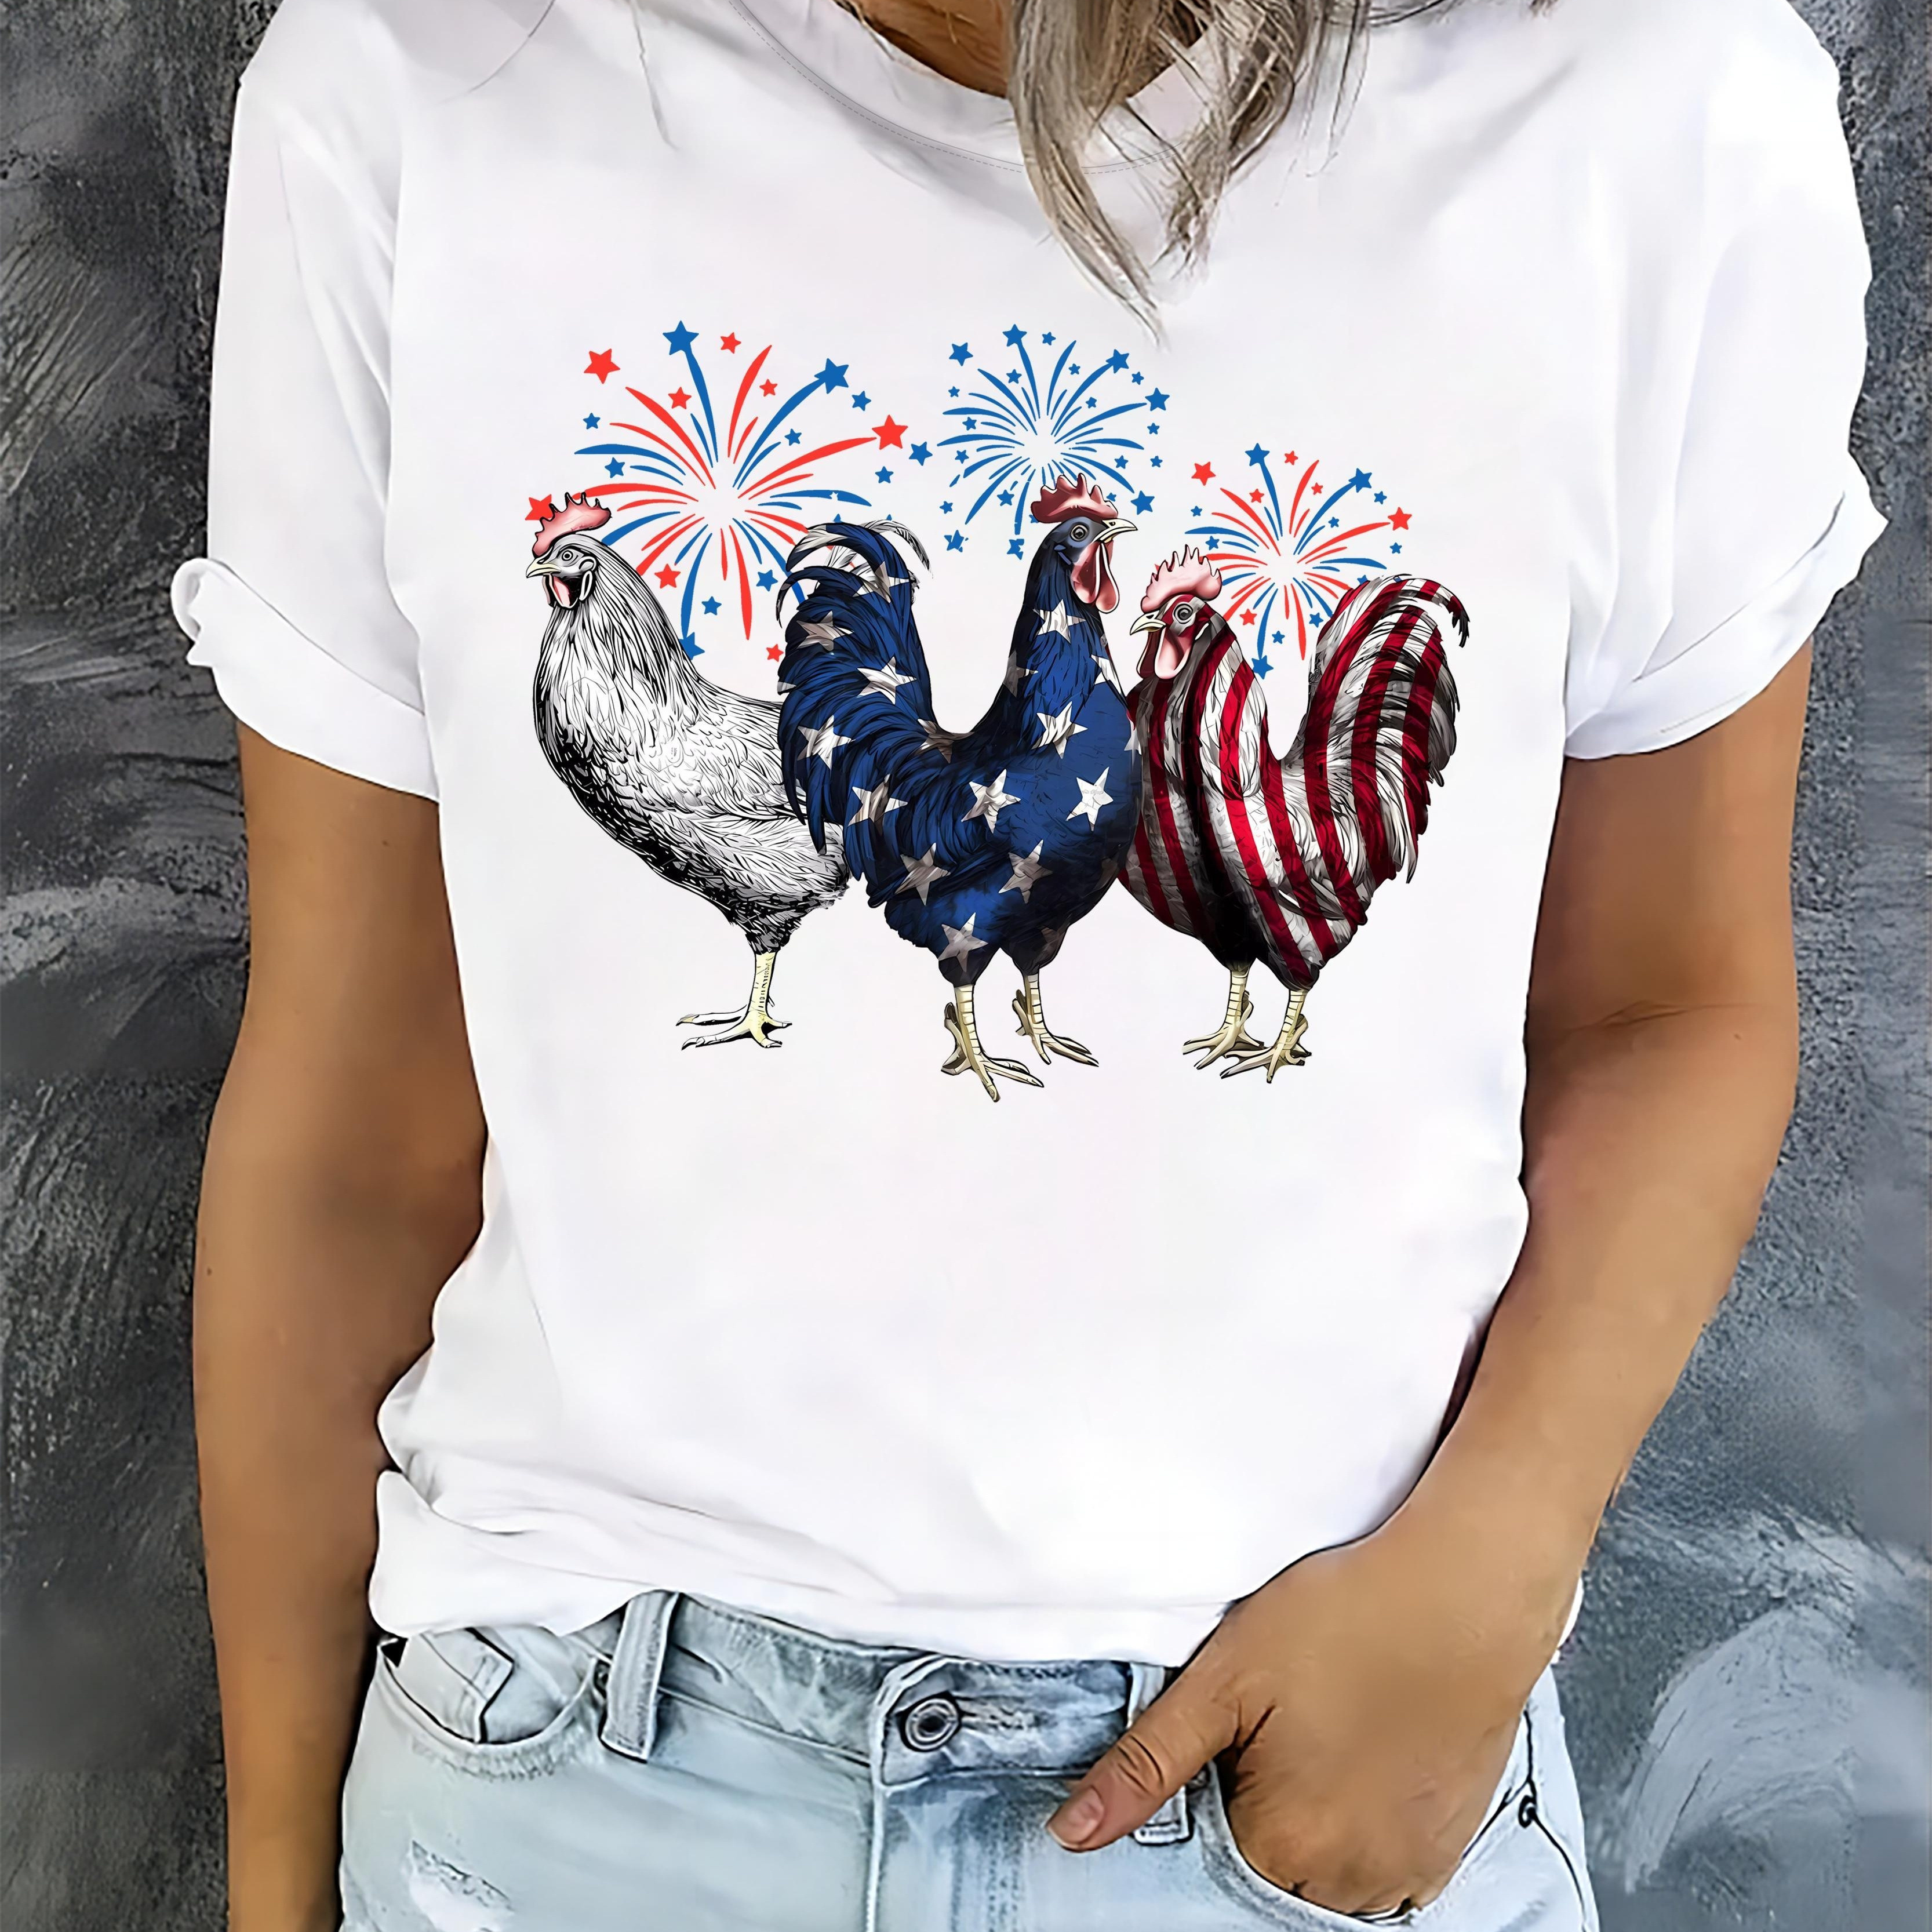 

Chicken & Fireworks Print T-shirt, Short Sleeve Crew Neck Casual Top For Summer & Spring, Women's Clothing